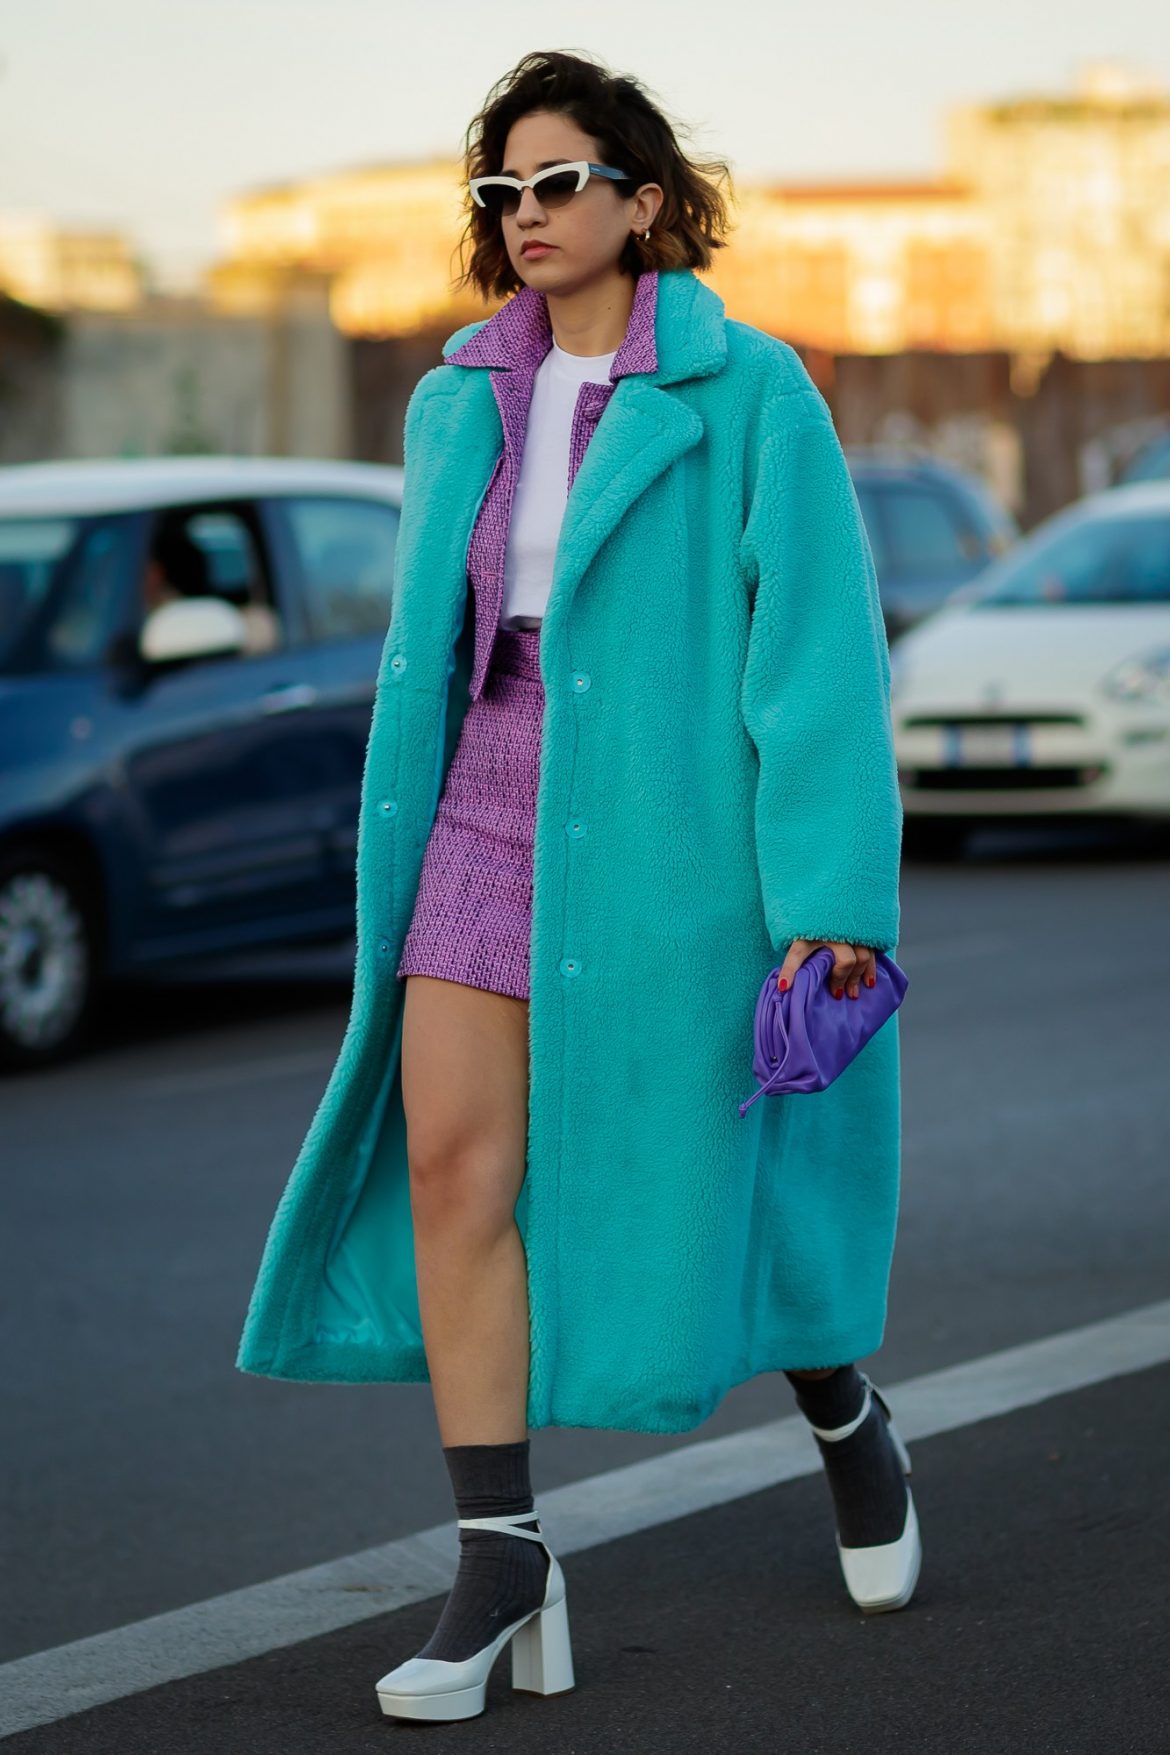 15 Outfits That Show The 80s Are Back In Style